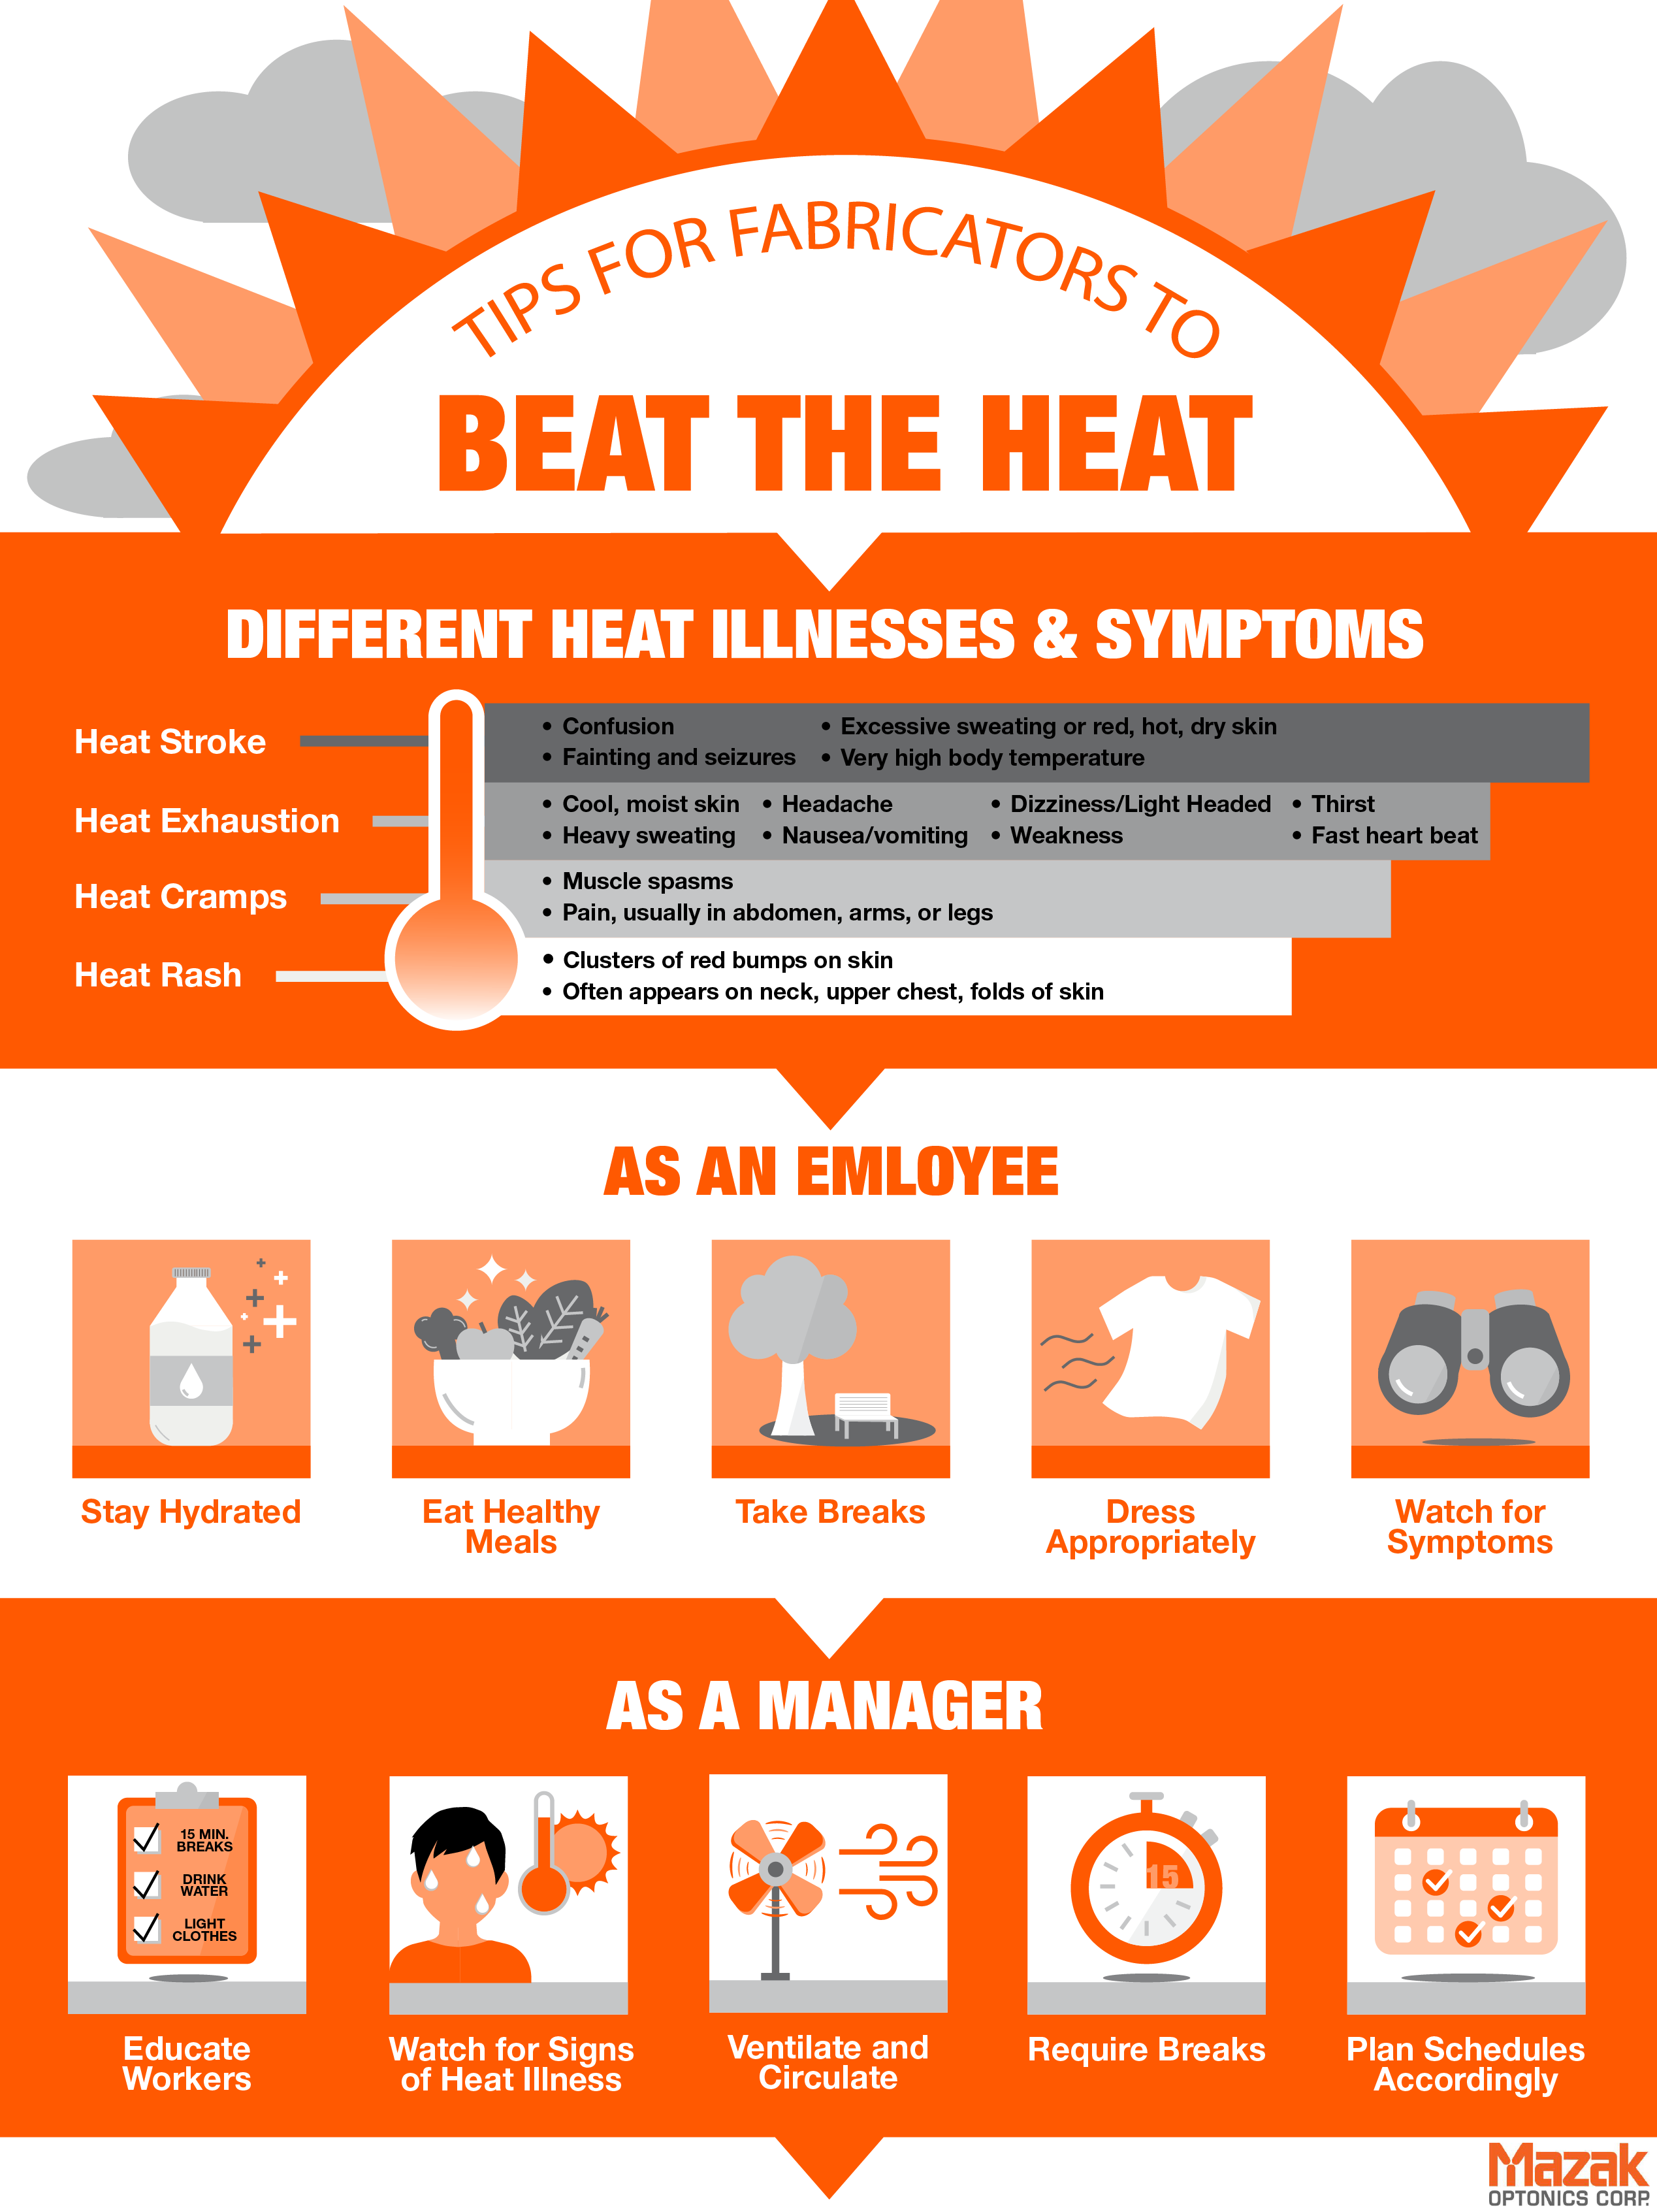 Beat the Heat - Ways to Stay Cool